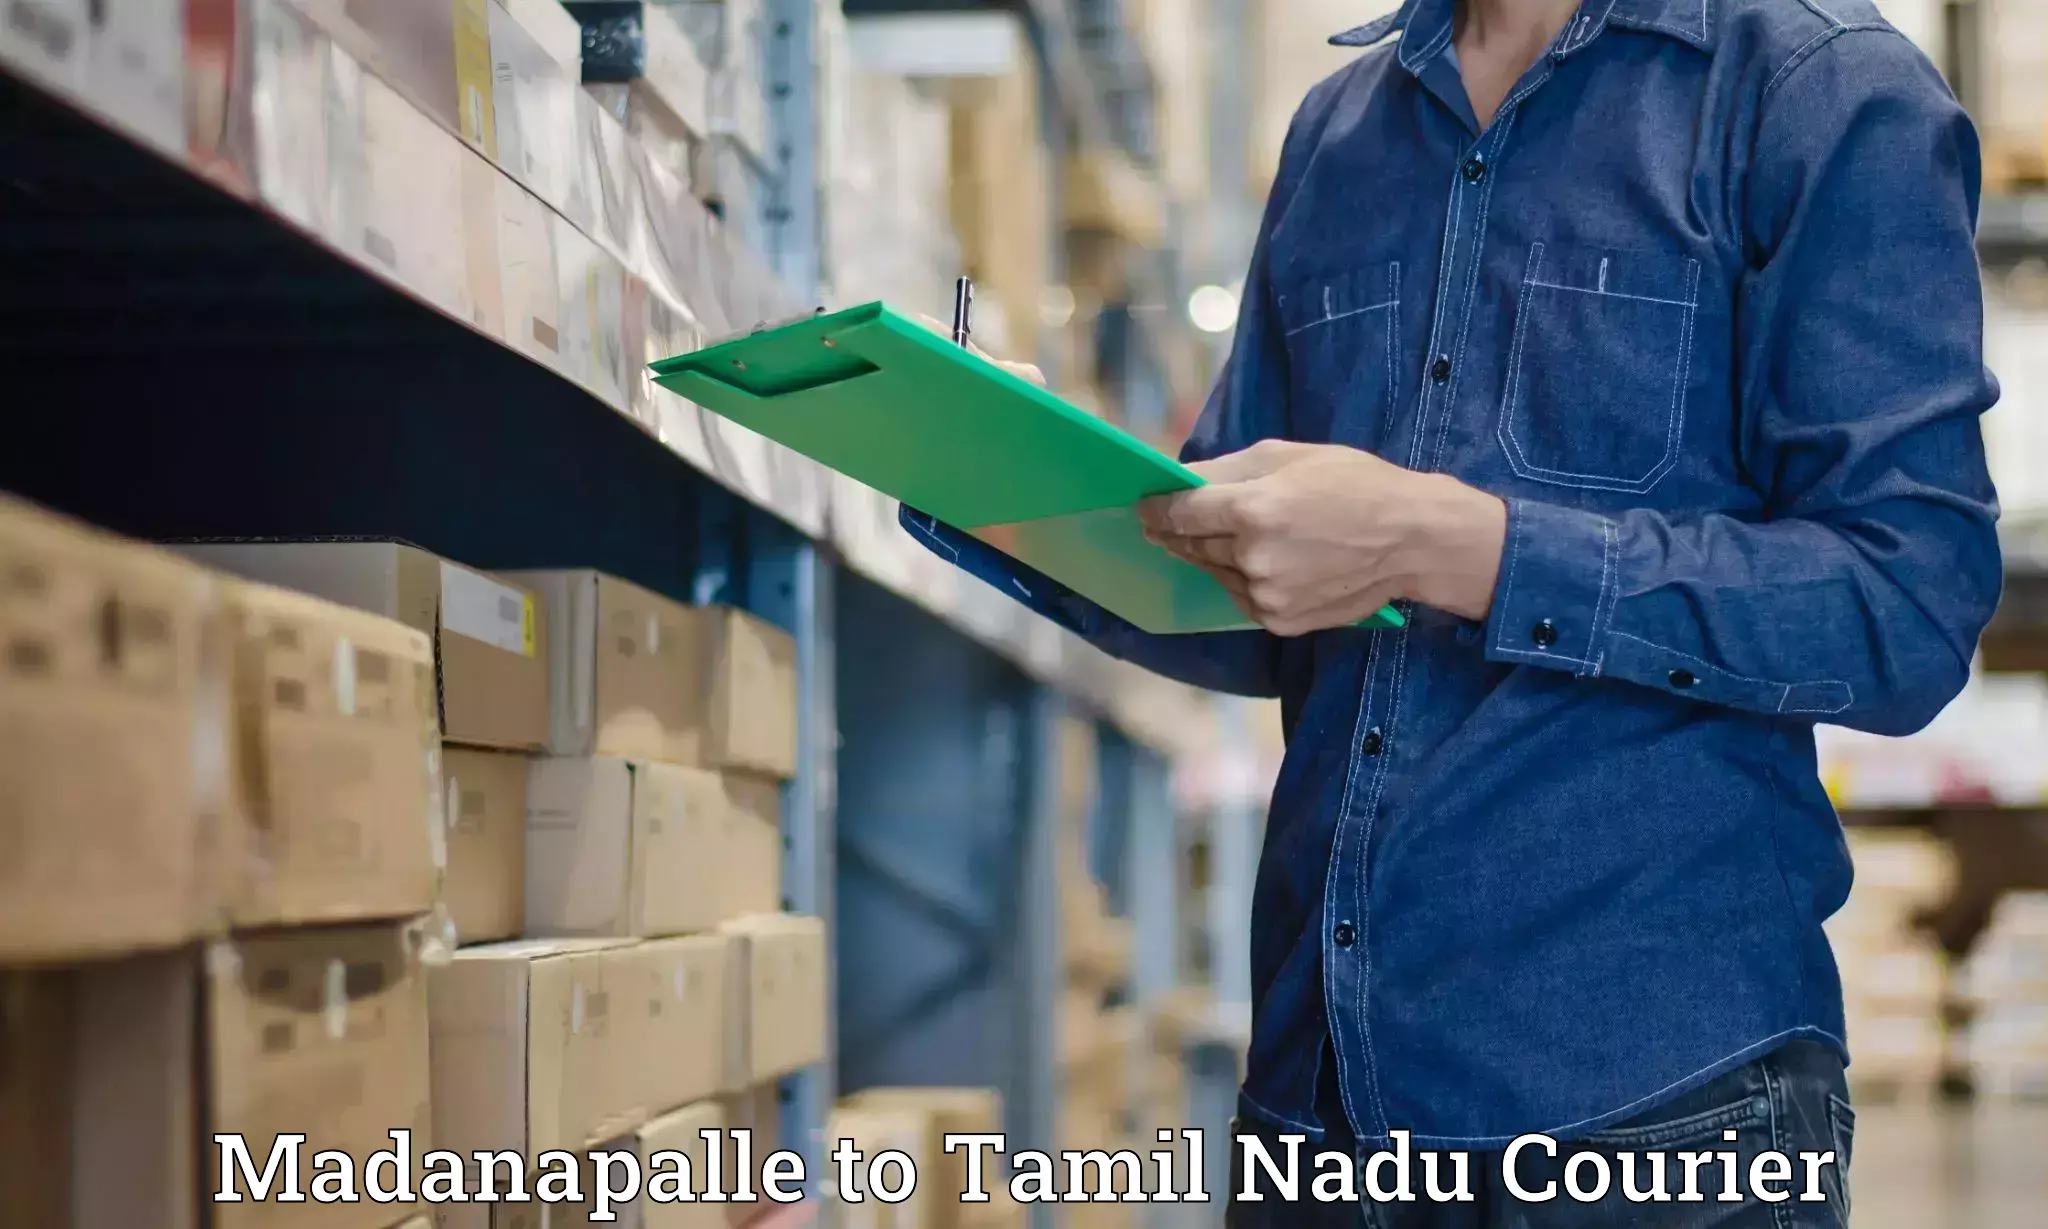 Personalized courier experiences Madanapalle to Coonoor